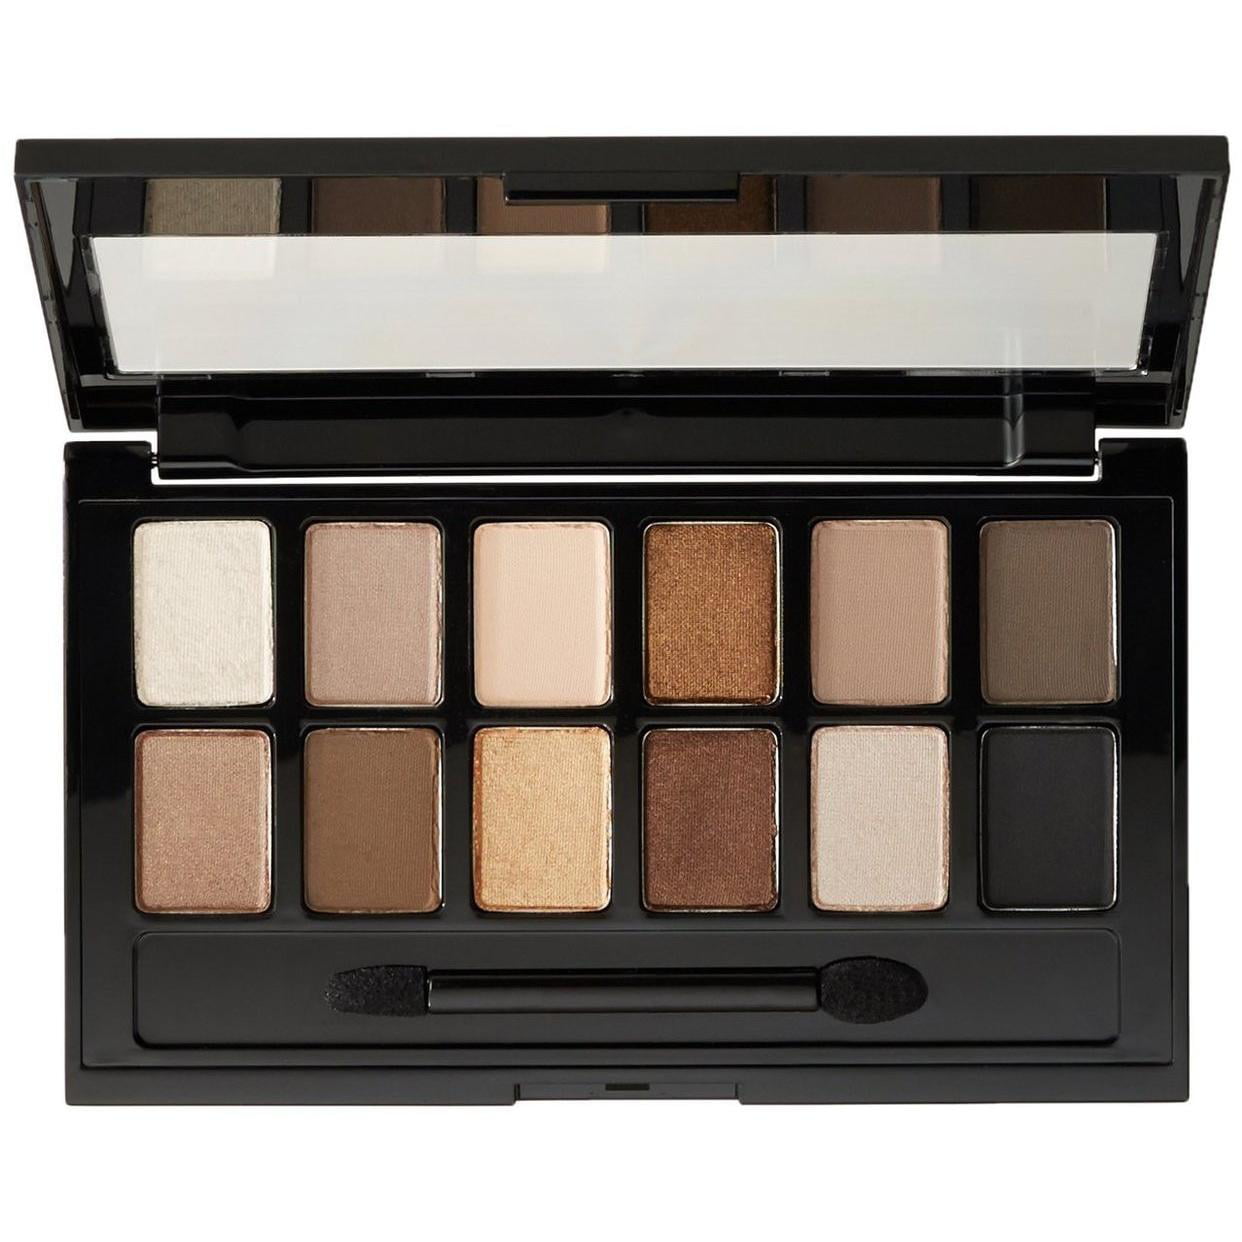 Maybelline Eyeshadow Palette, The Nudes, 12 Shade Palette - image 1 of 7